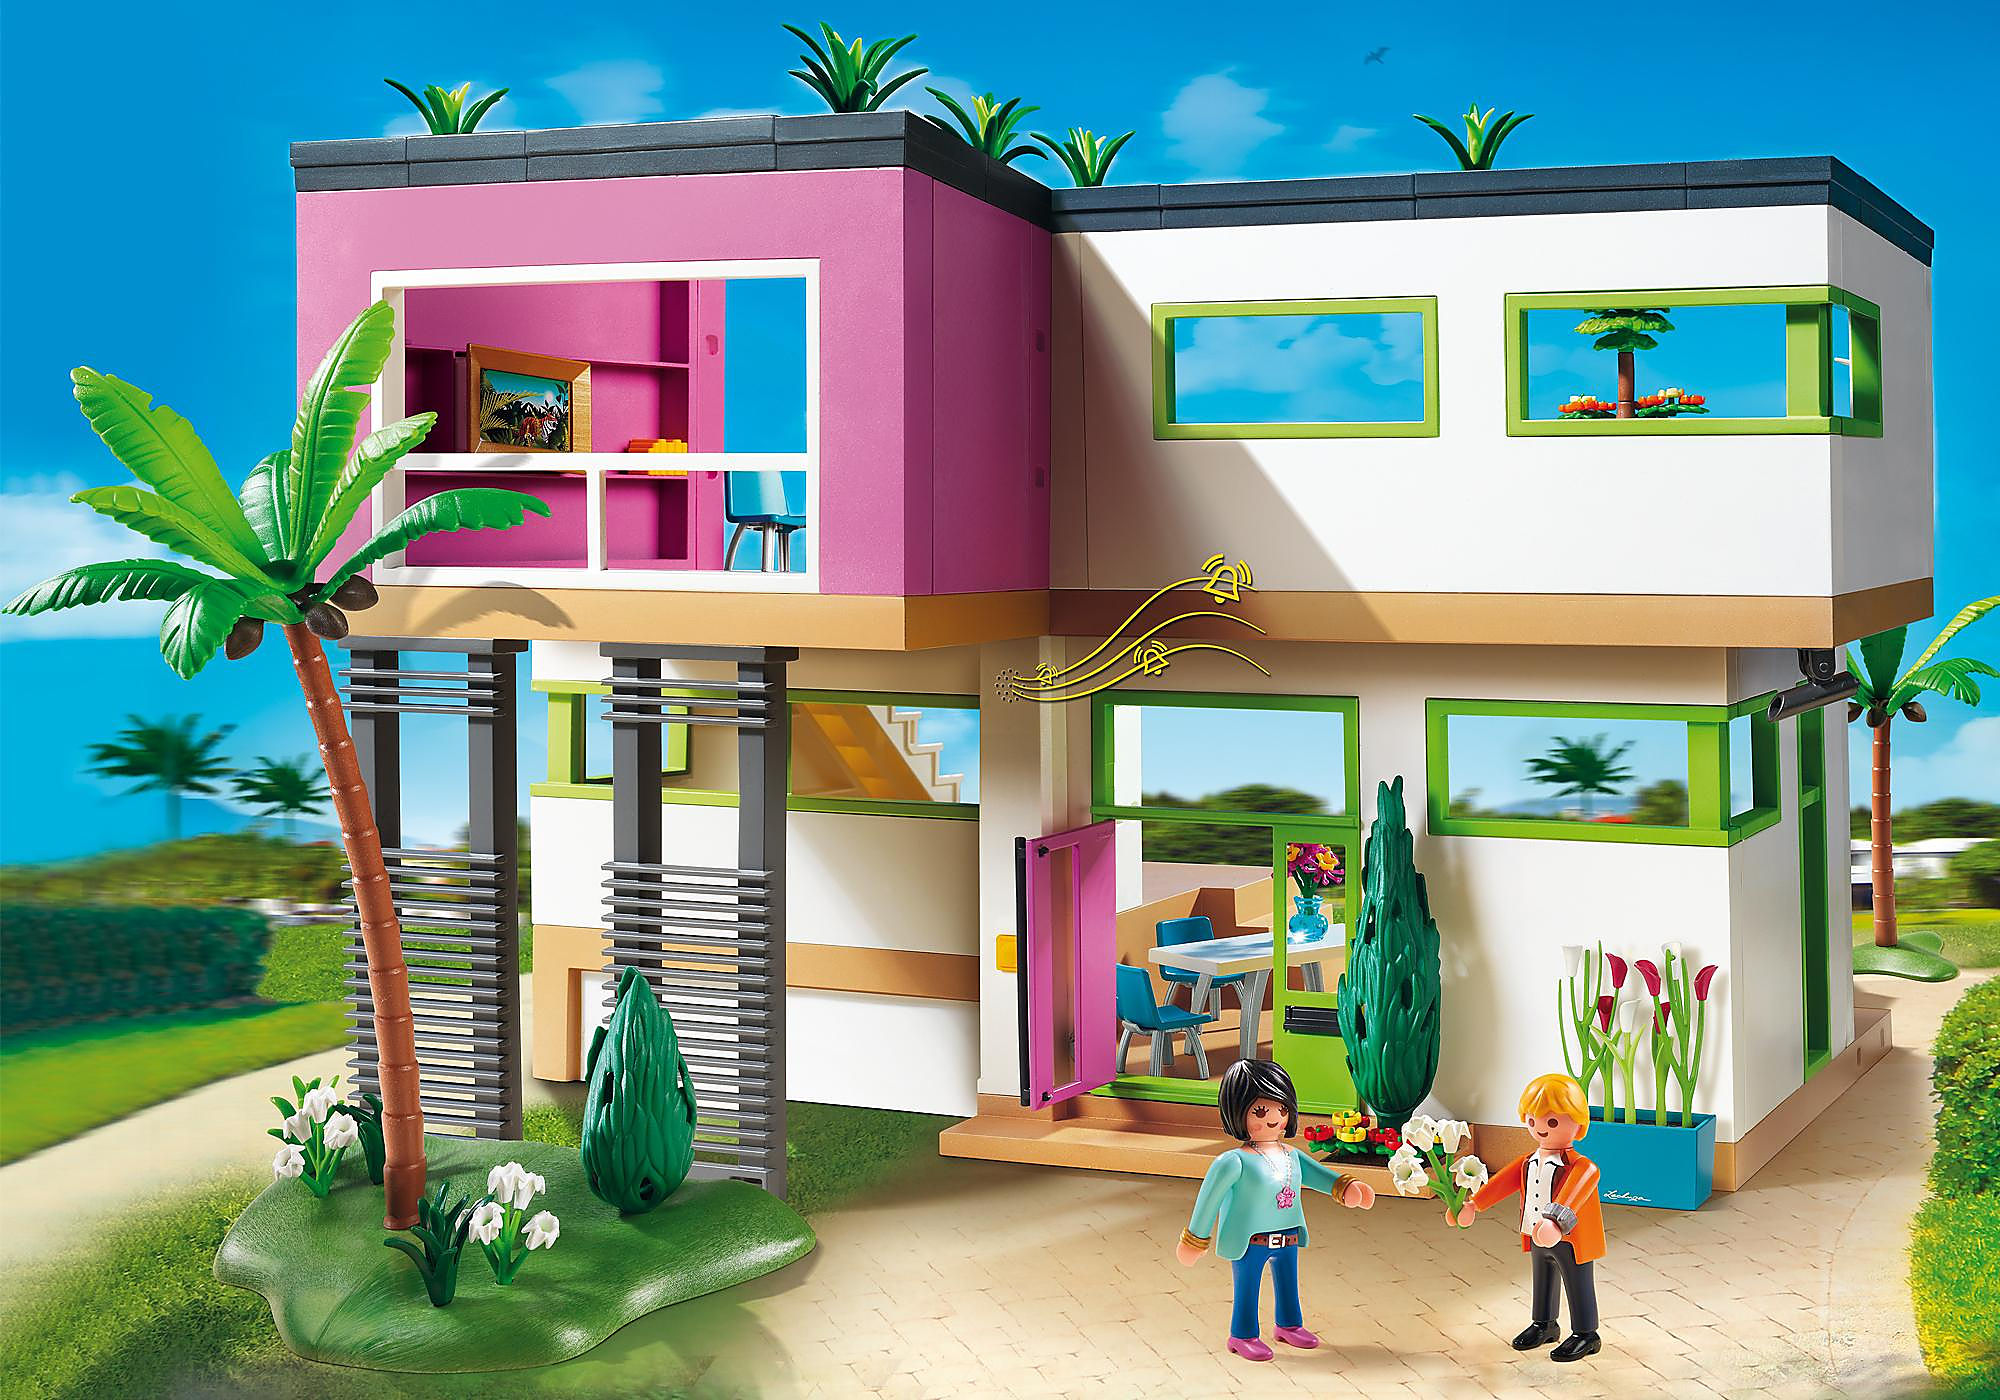 Playmobil City Life: Deluxe Teenager's Room